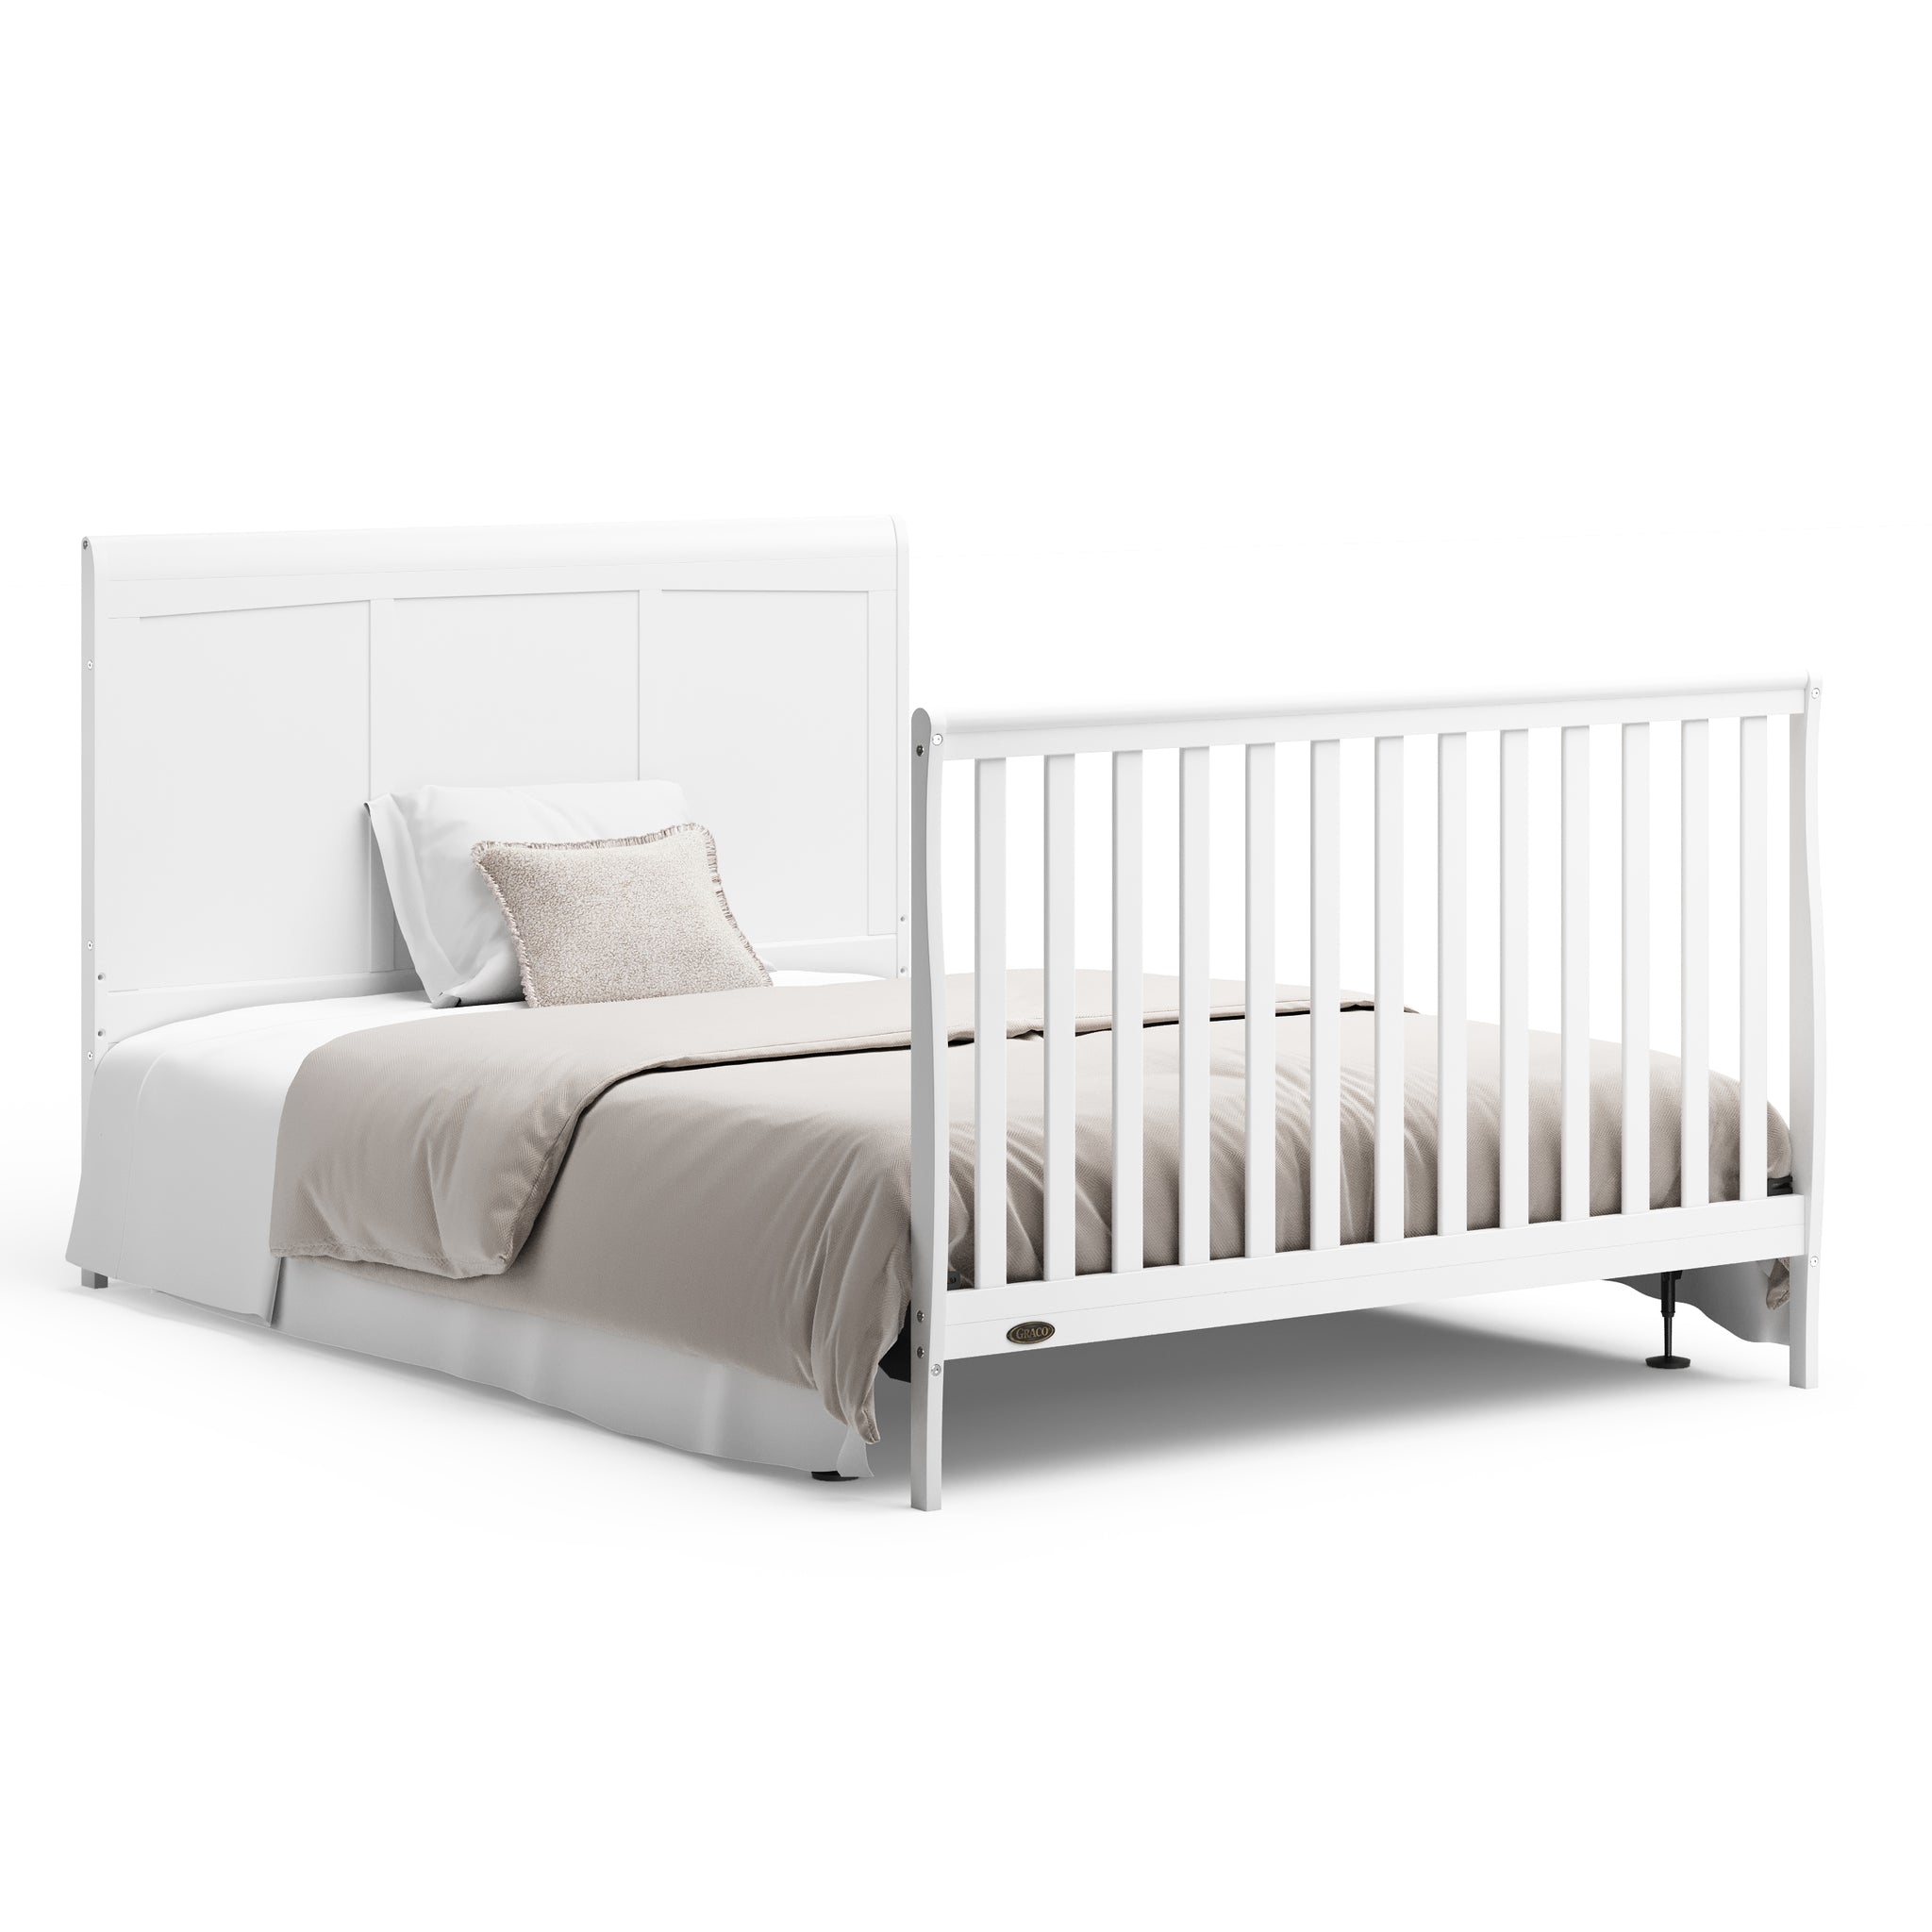 White crib in full-size bed conversion with headboard and footboard